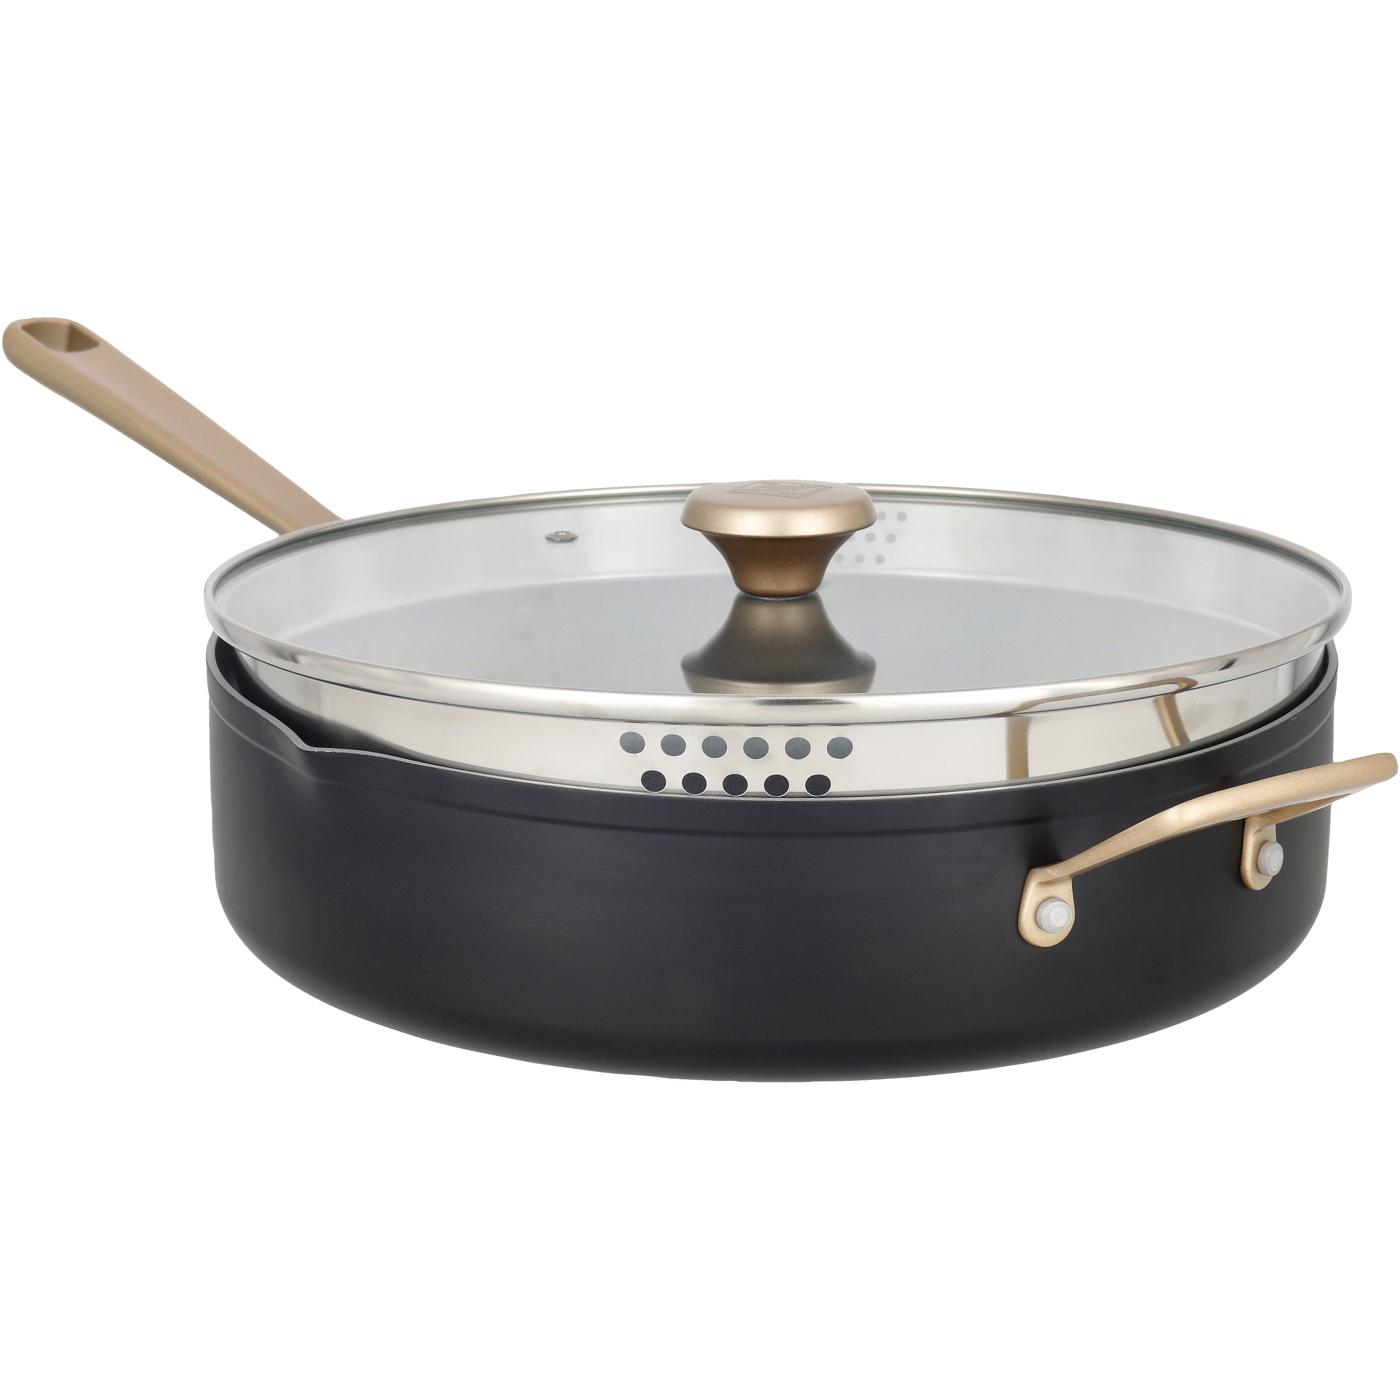 Kitchen & Table by H-E-B Non-Stick Sauté Pan with Strainer Lid - Classic Black; image 3 of 7